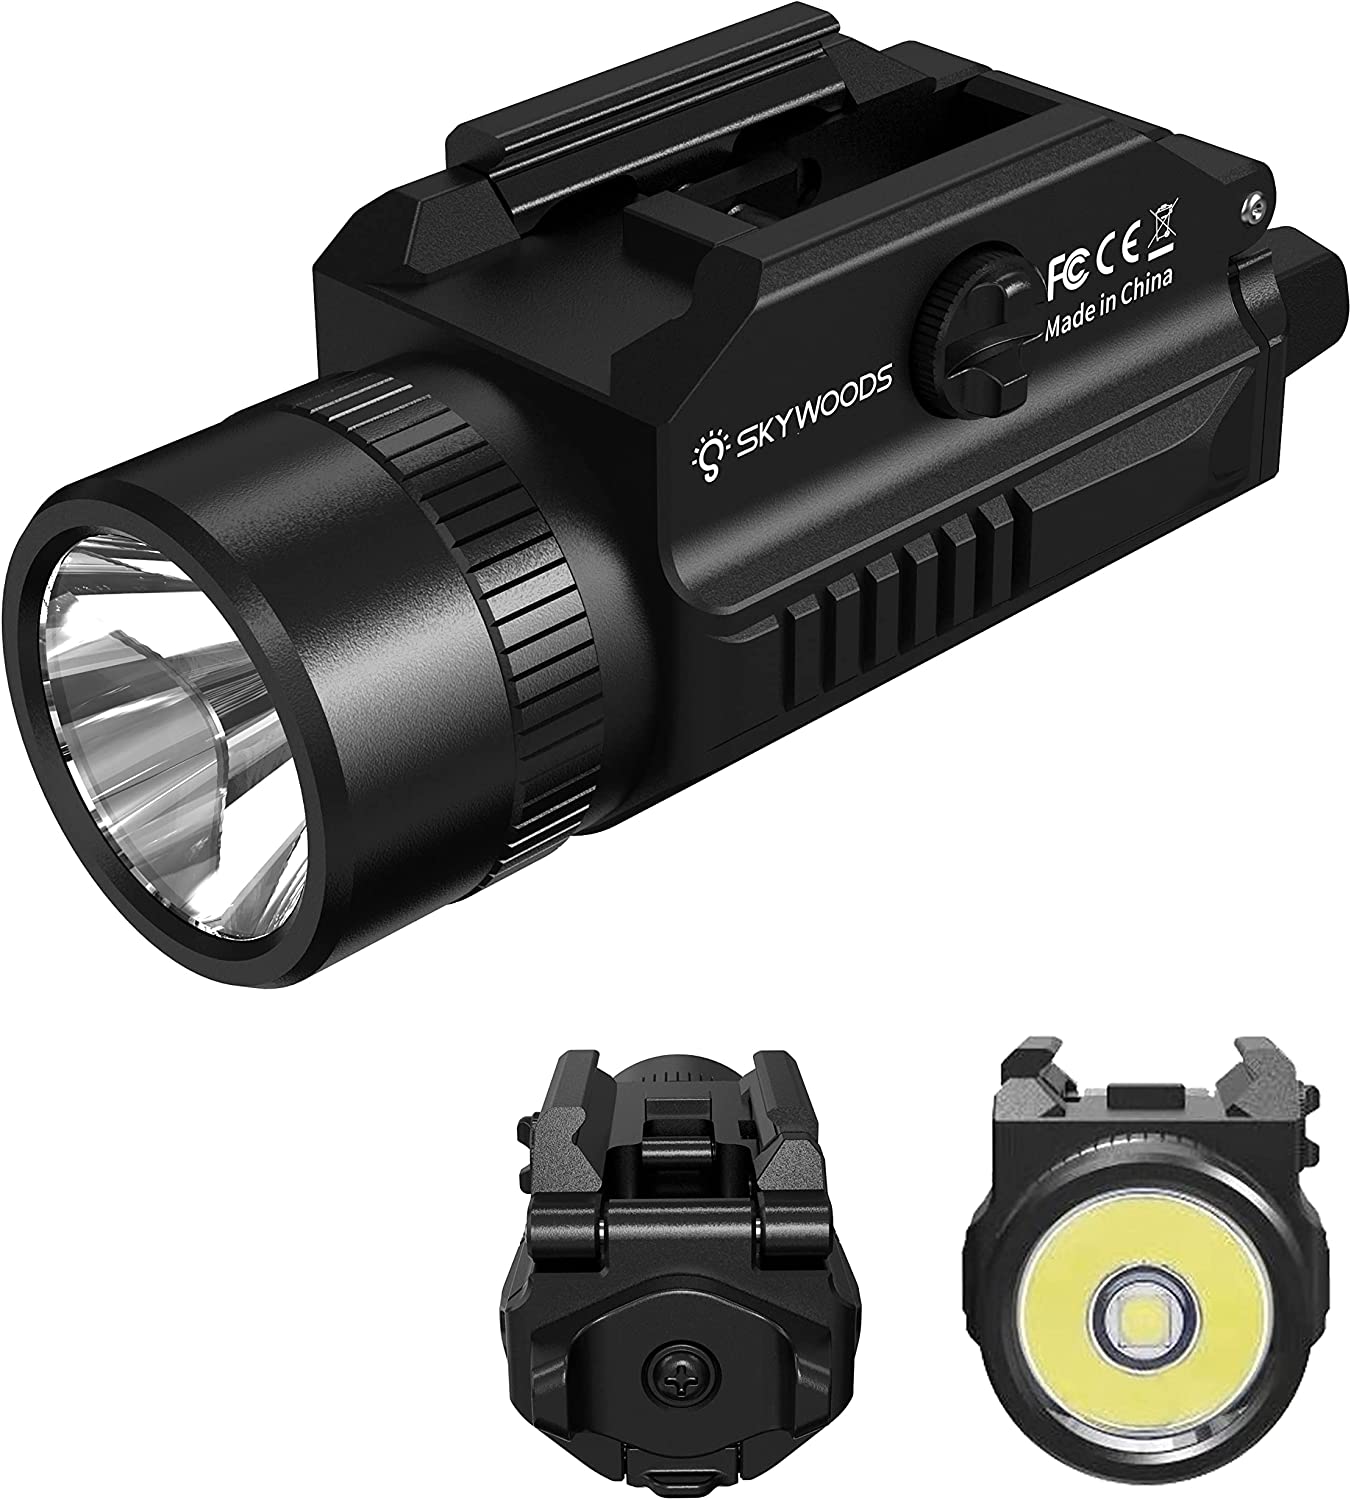 Skywoods 1200 Lumen Rail Mounted Tactical Pistol Flashlight for Weapons with Strobe for Picatinny 1913 and Glock Gun with 2 x CR123A Batteries